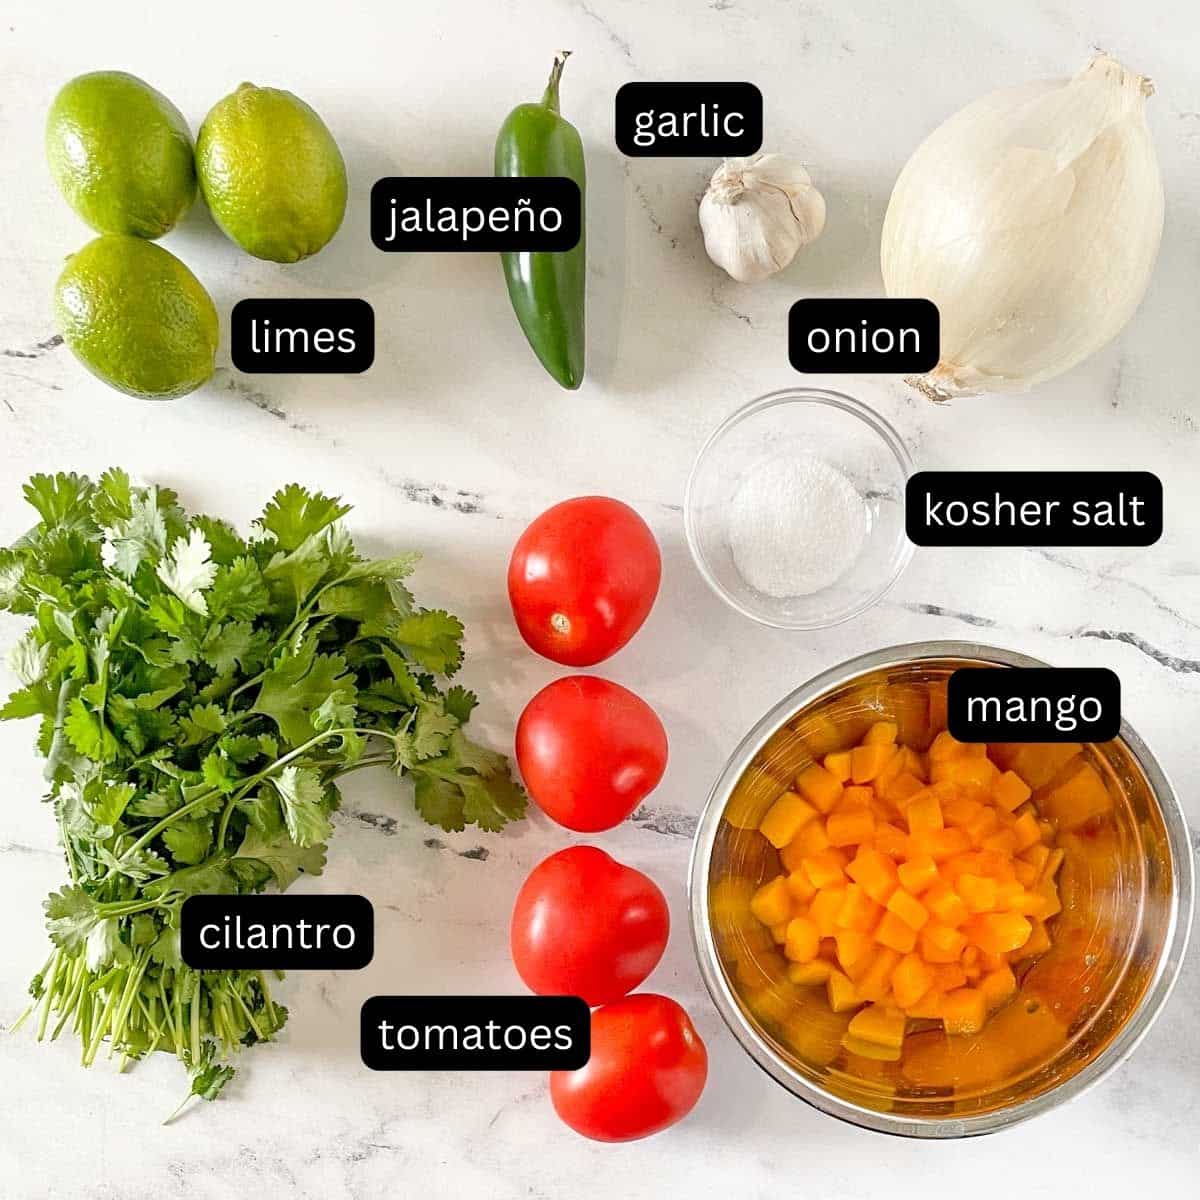 The labeled ingredients for mango pico de gallo sit on a white marble counter.